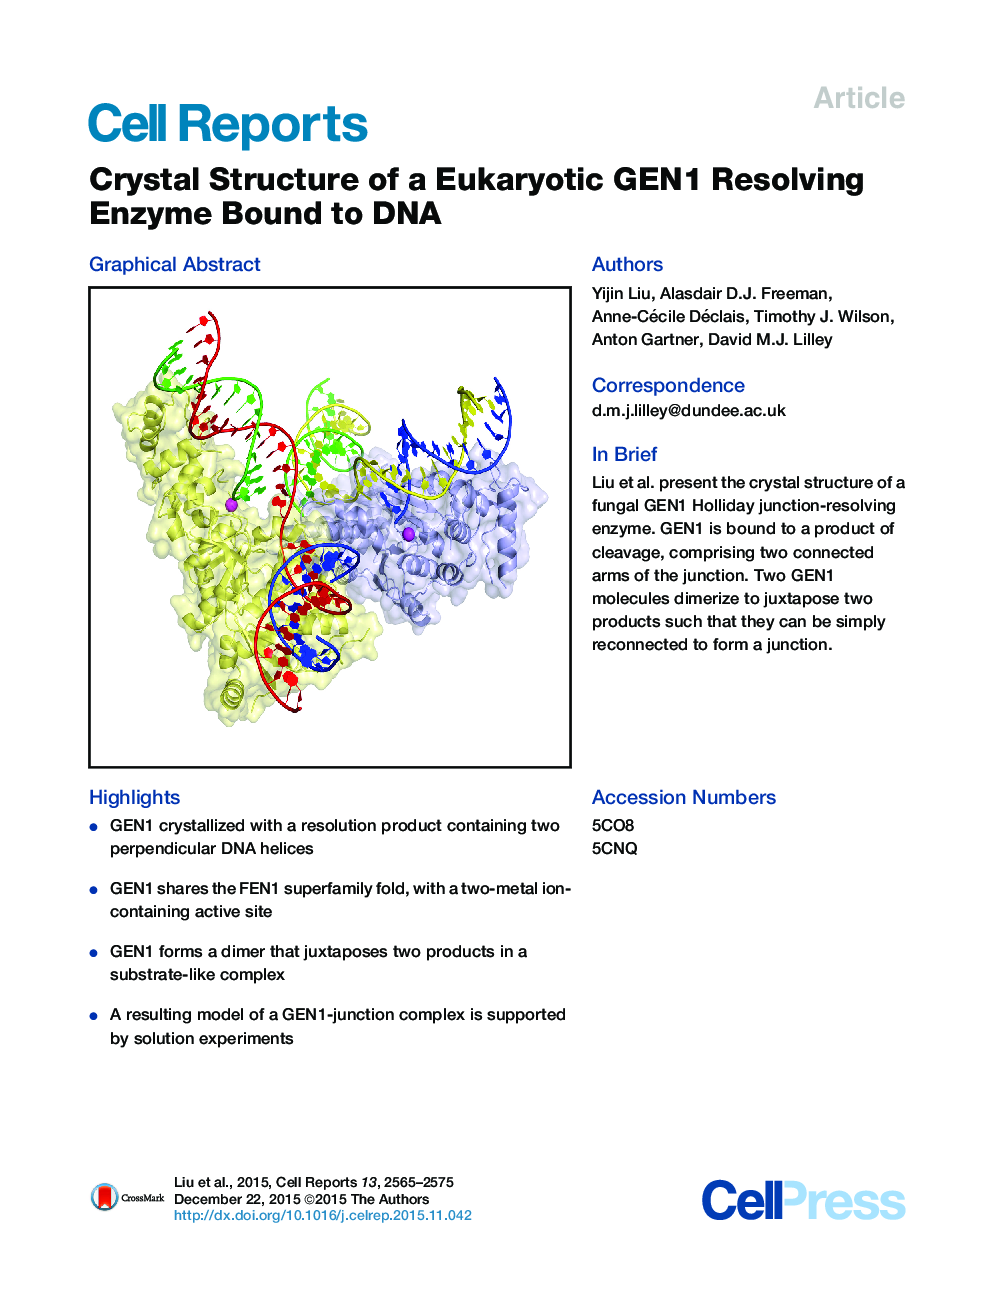 Crystal Structure of a Eukaryotic GEN1 Resolving Enzyme Bound to DNA 